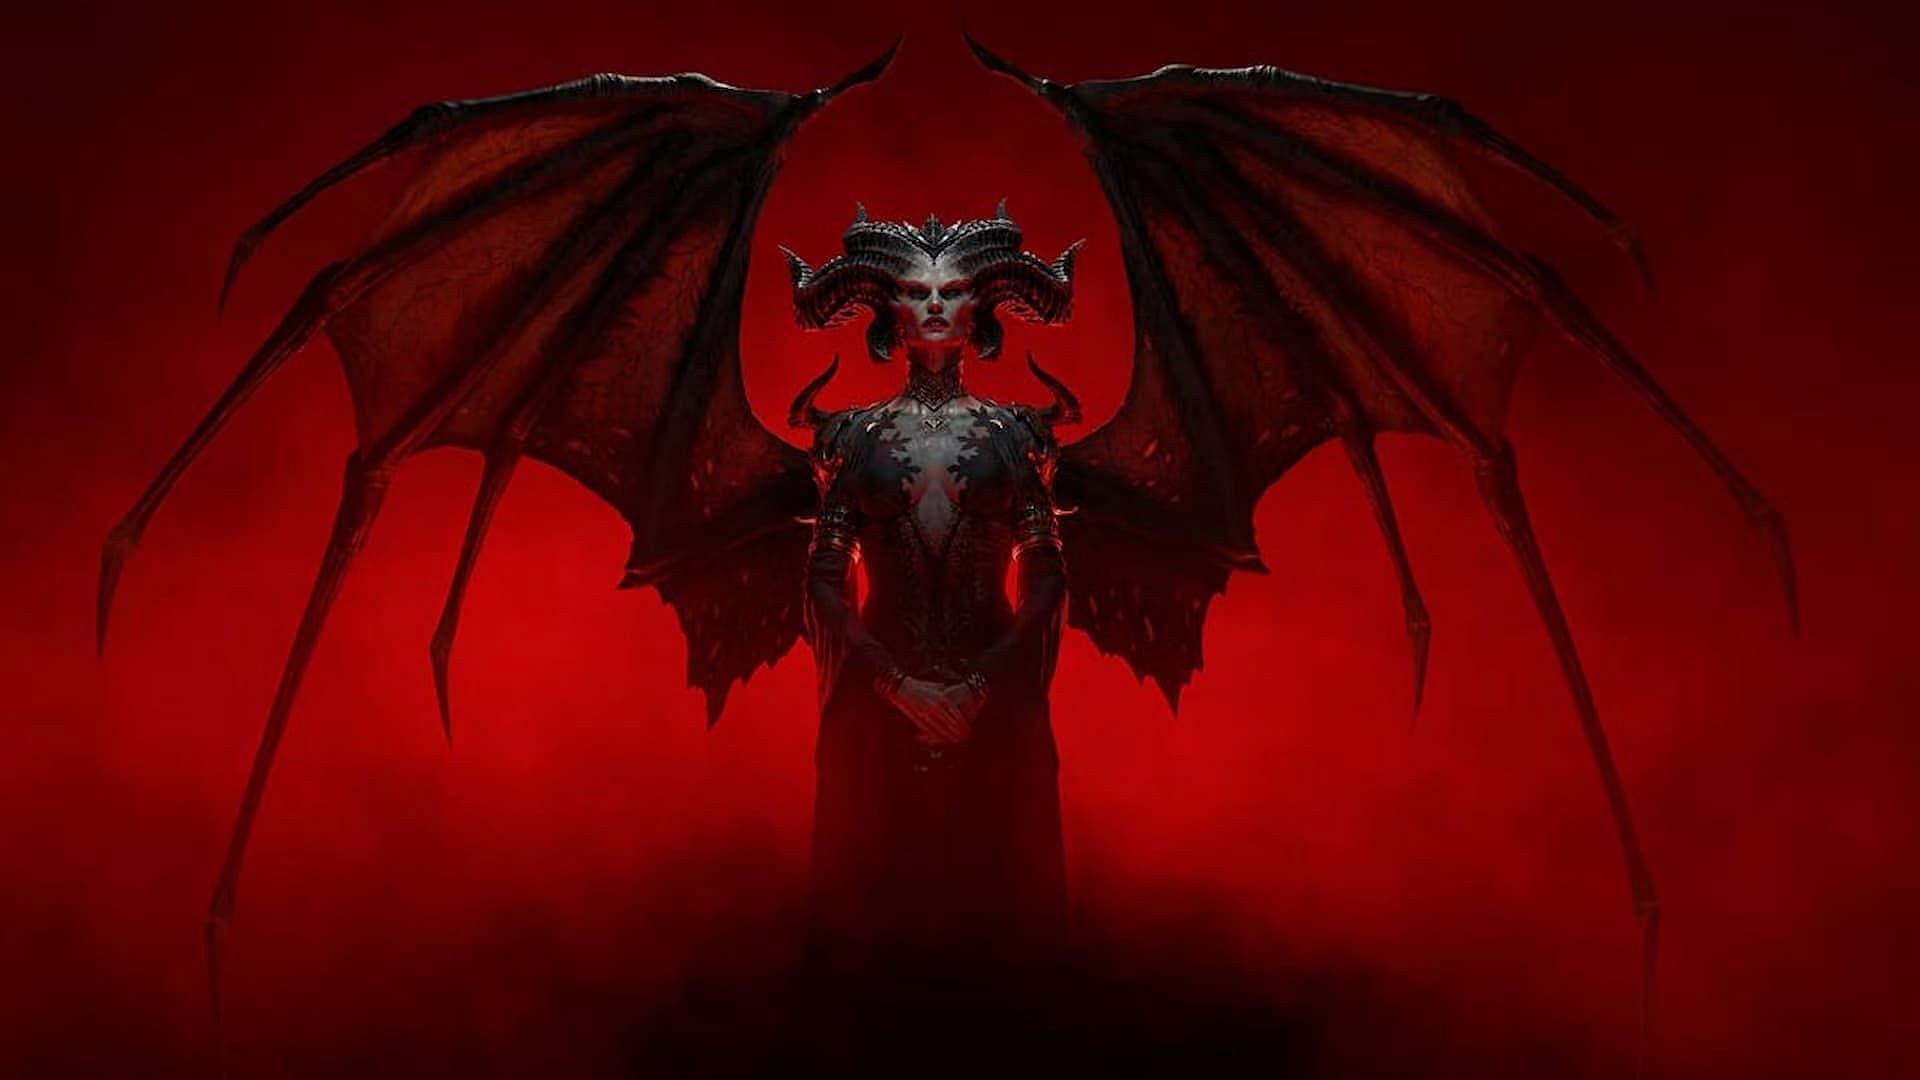 The Diablo 4 error code 316719 usually appears on the loading screen before the game launches. 